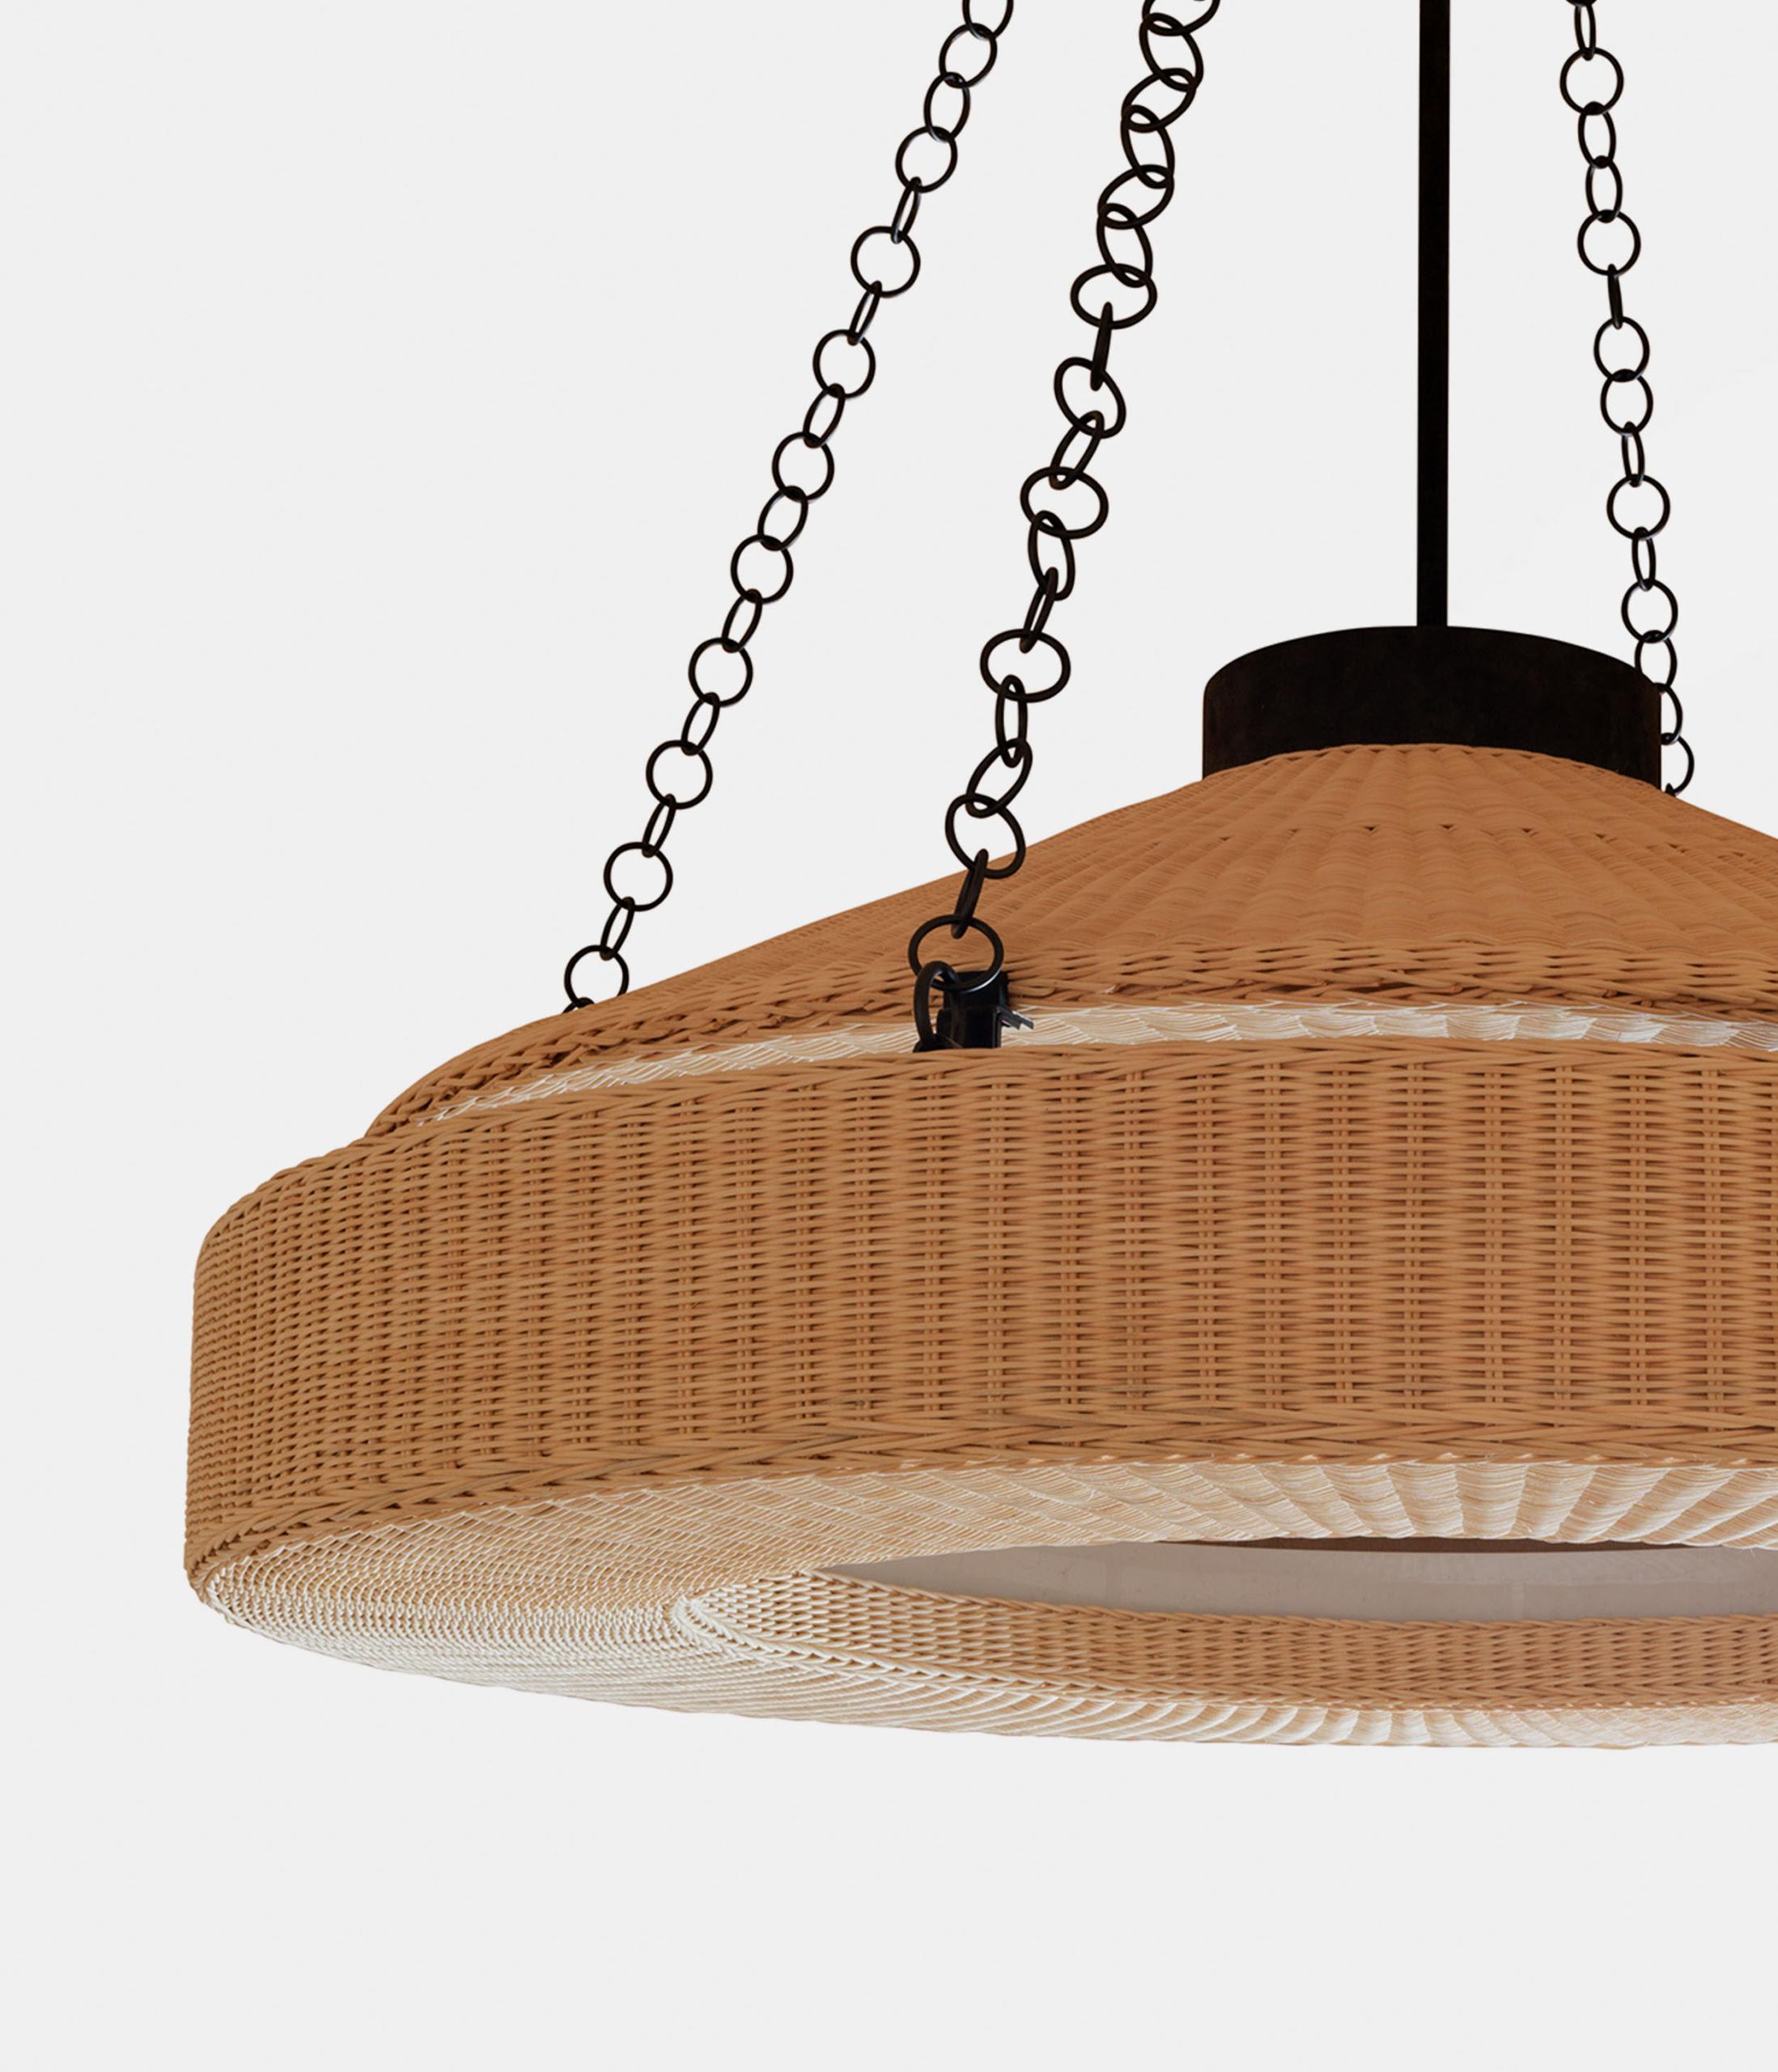 Orion Chandelier -- Stephane Parmentier x Giobagnara

Features woven rattan with burnished bronze suspension chains. Suspensions' length adjustable on request.

Embracing sleek designs and beautiful materials, the Stephane Parmentier Collection for